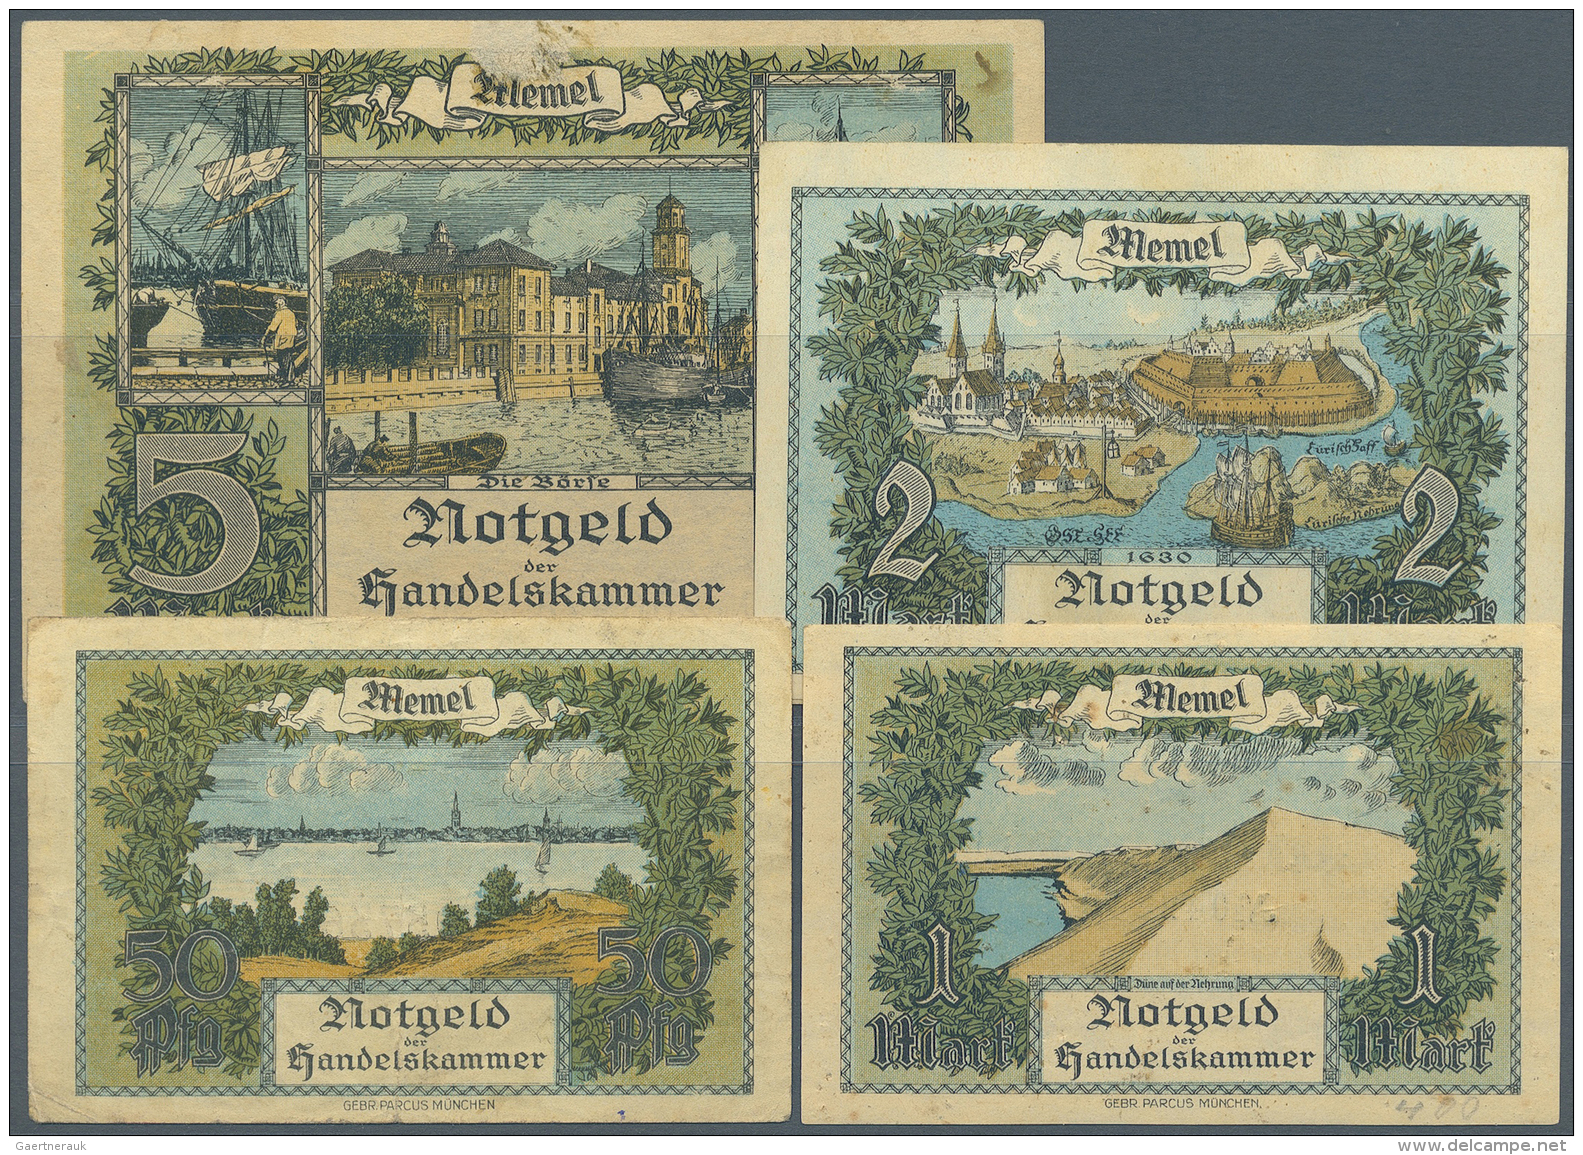 Memel: Set Of 4 Different Notes Containing 1/2, 1, 2 And 5 Mark 1922 P. 1-4. The 1/2 Mark Is Condition VF-, The 1 Mark I - Autres - Europe